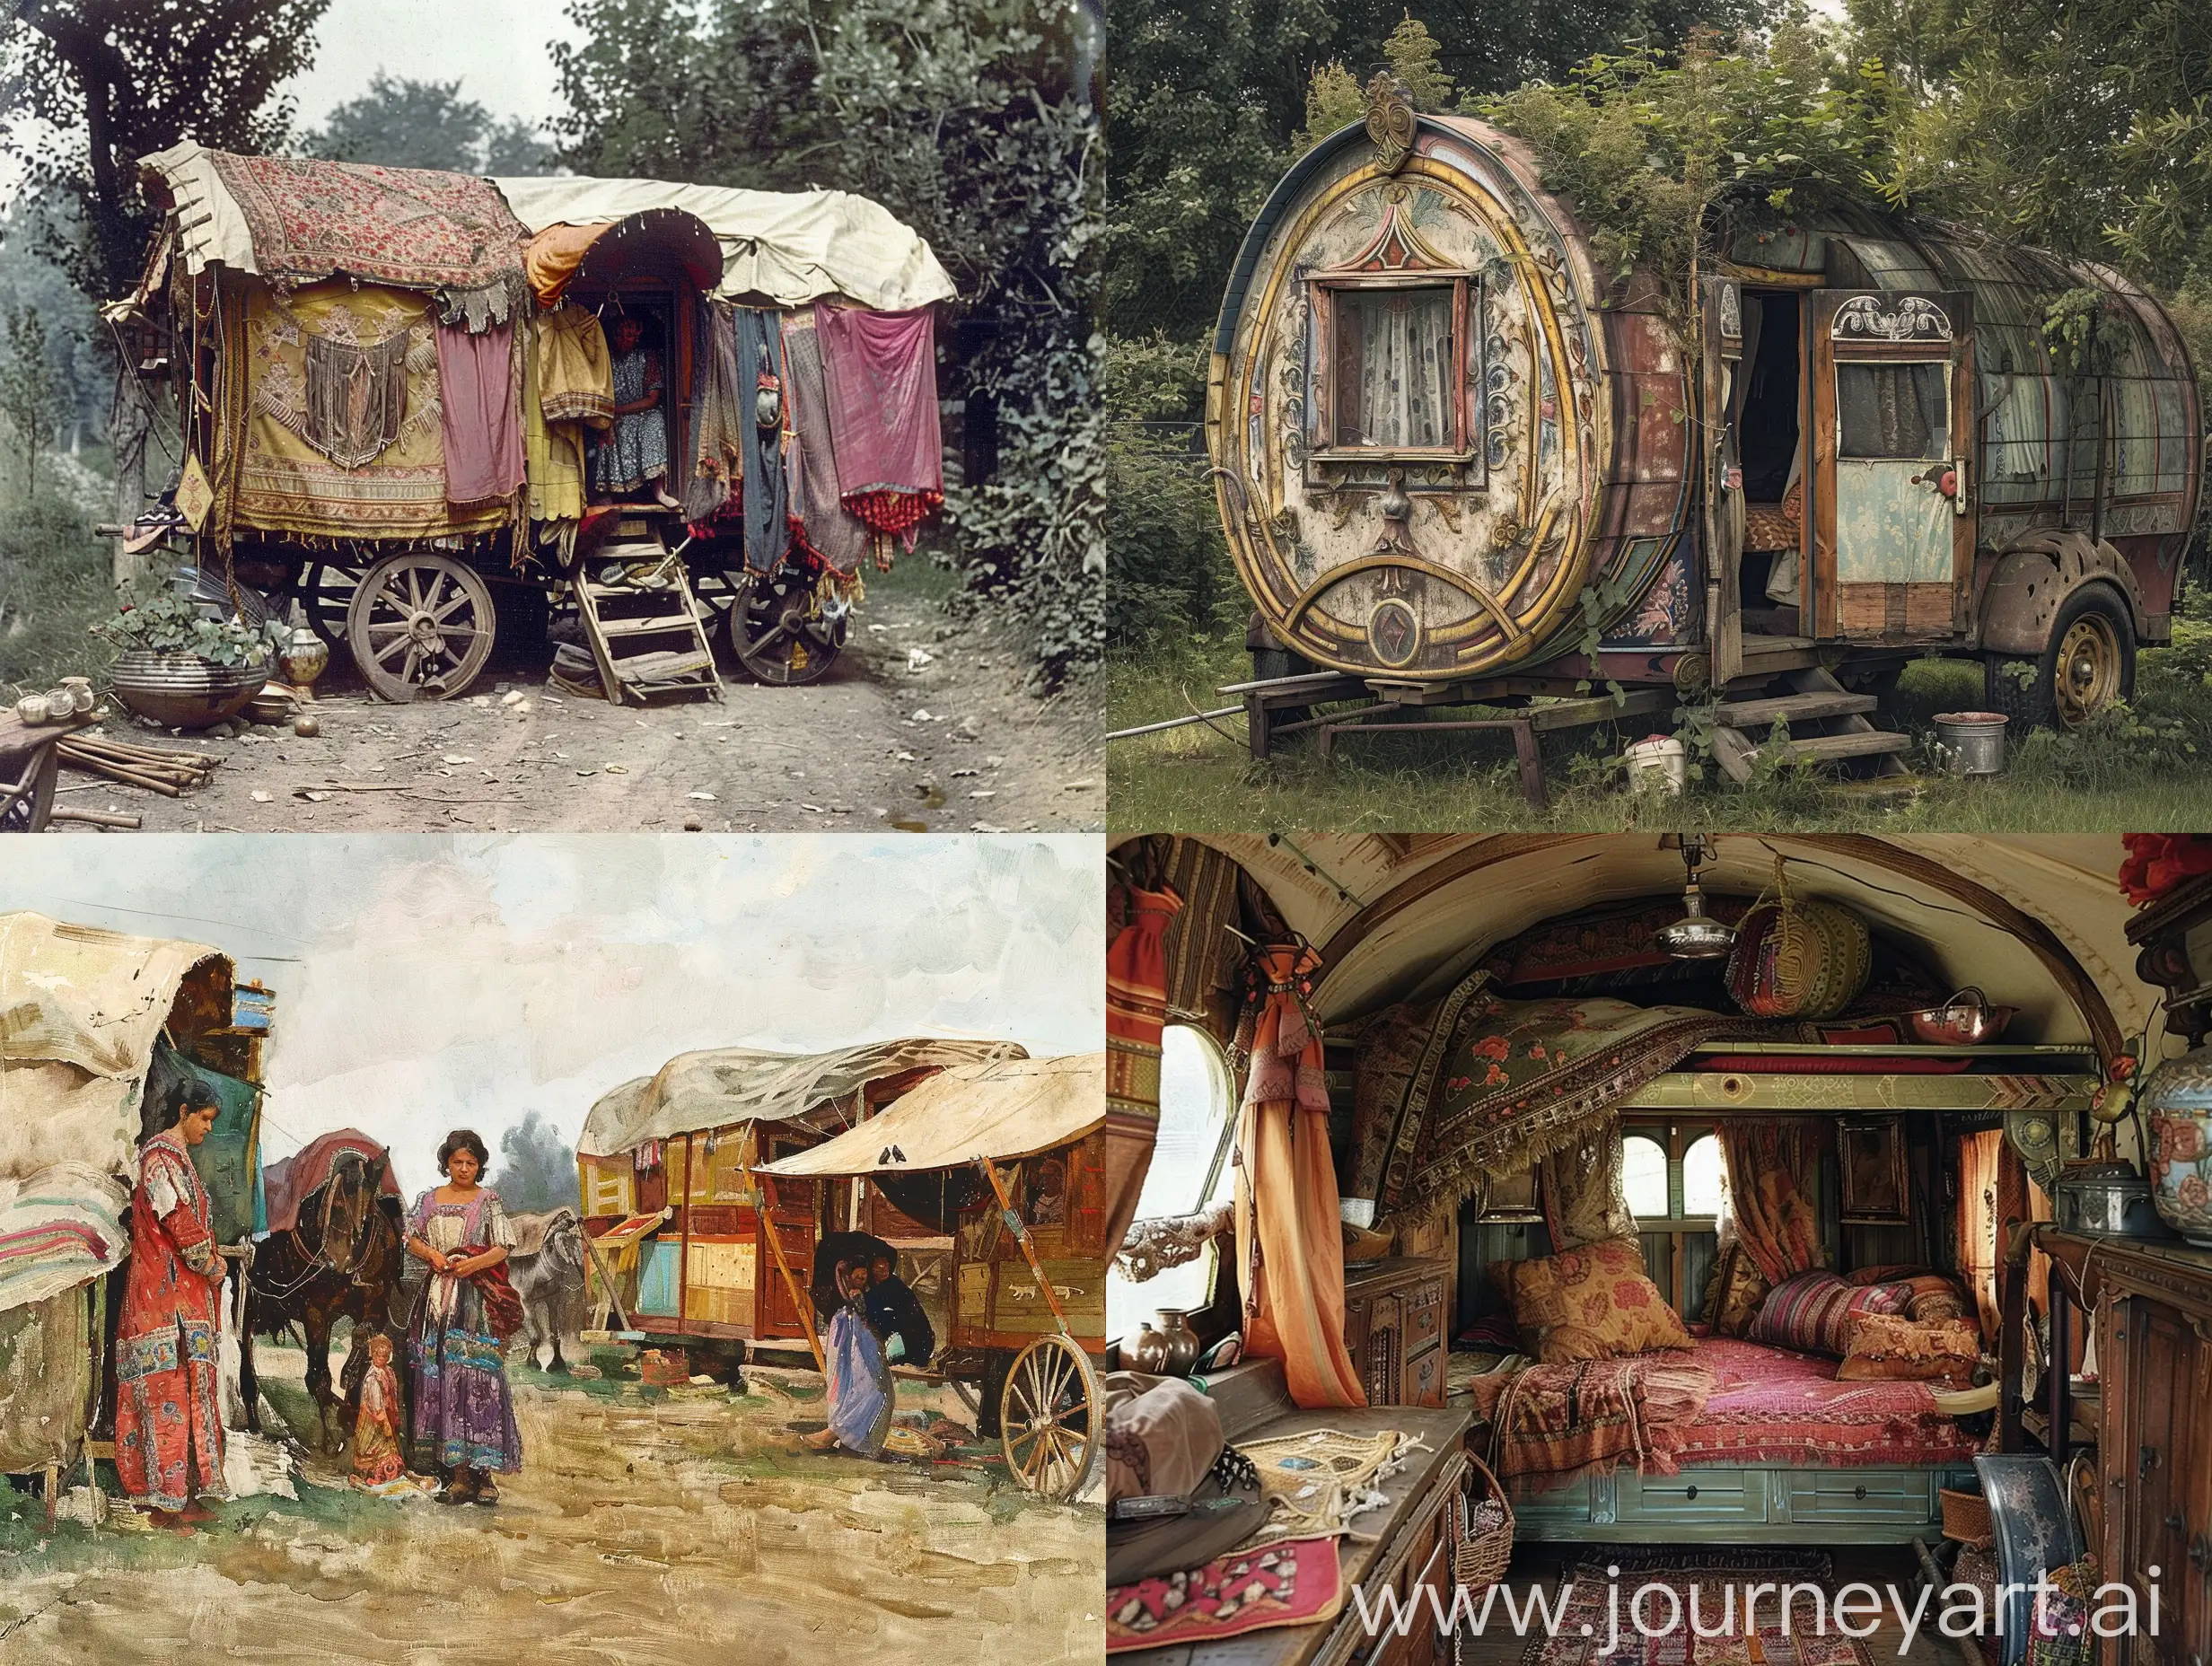 Colorful-Gypsy-Caravans-in-a-Vibrant-Village-Setting